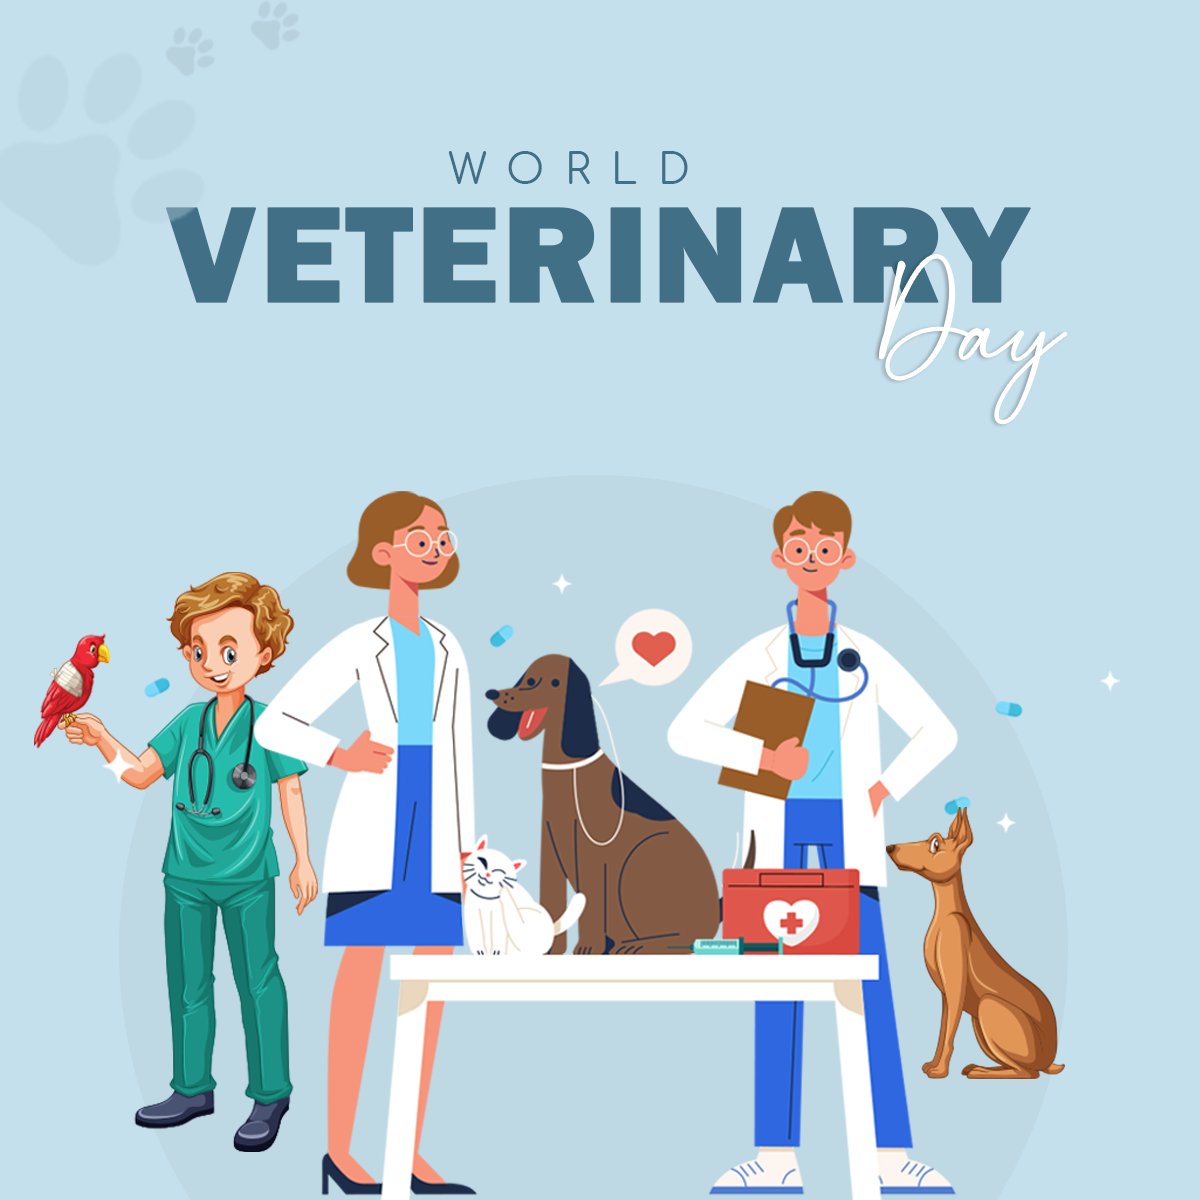 'World Veterinary Day: Celebrating Our Furry Friends' Guardians! 🐾 Remember, their well-being is our priority. Keep them healthy and happy with top-quality pet care supplies from petcaresupplies! Explore now for their wagging tails and purring hearts.

#WorldVeterinaryDay